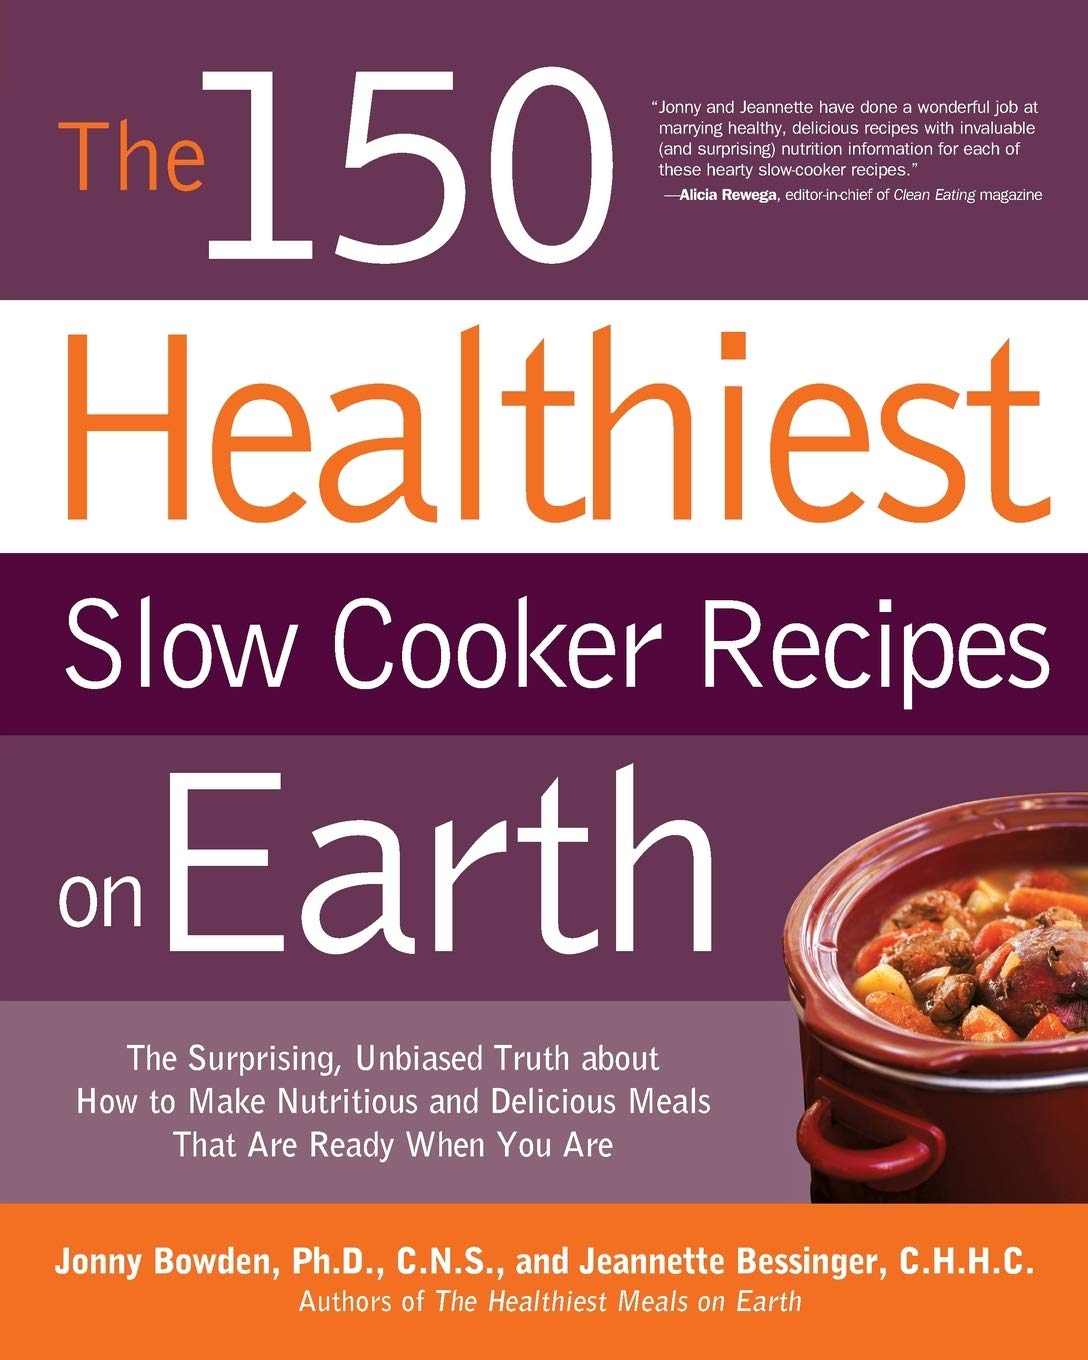 Livre ISBN 1592334946 The 150 Healthiest Slow Cooker Recipes on Earth: The Surprising Unbiased Truth About How to Make Nutritious and Delicious Meals that are Ready When You Are (Jonny Bowden)